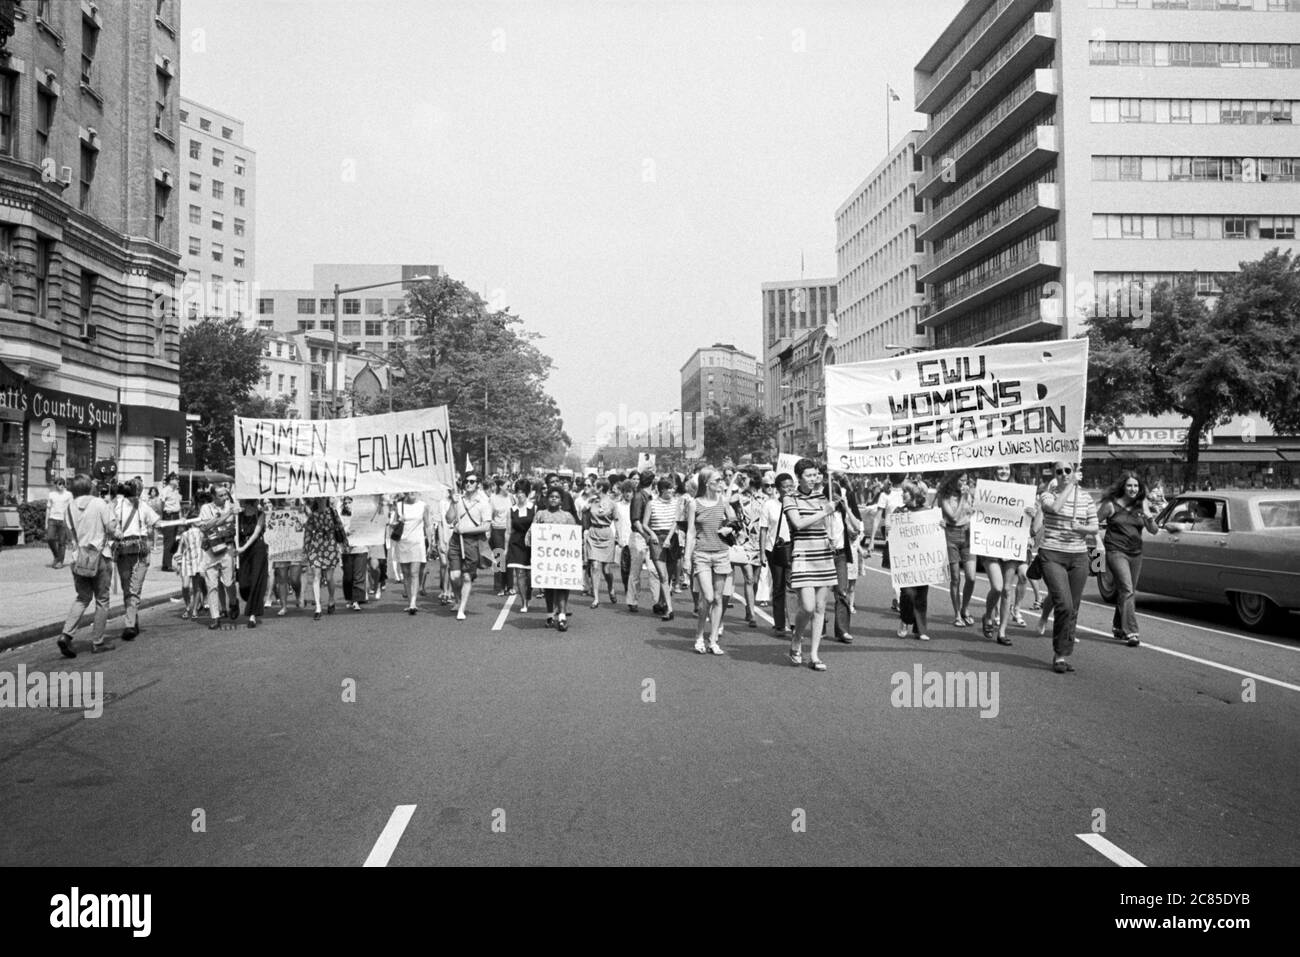 Women's March for Equal Rights from Farrugut Square to Lafayette Park, Washington, D.C., USA, Warren K. Leffler, August 26, 1970 Stock Photo